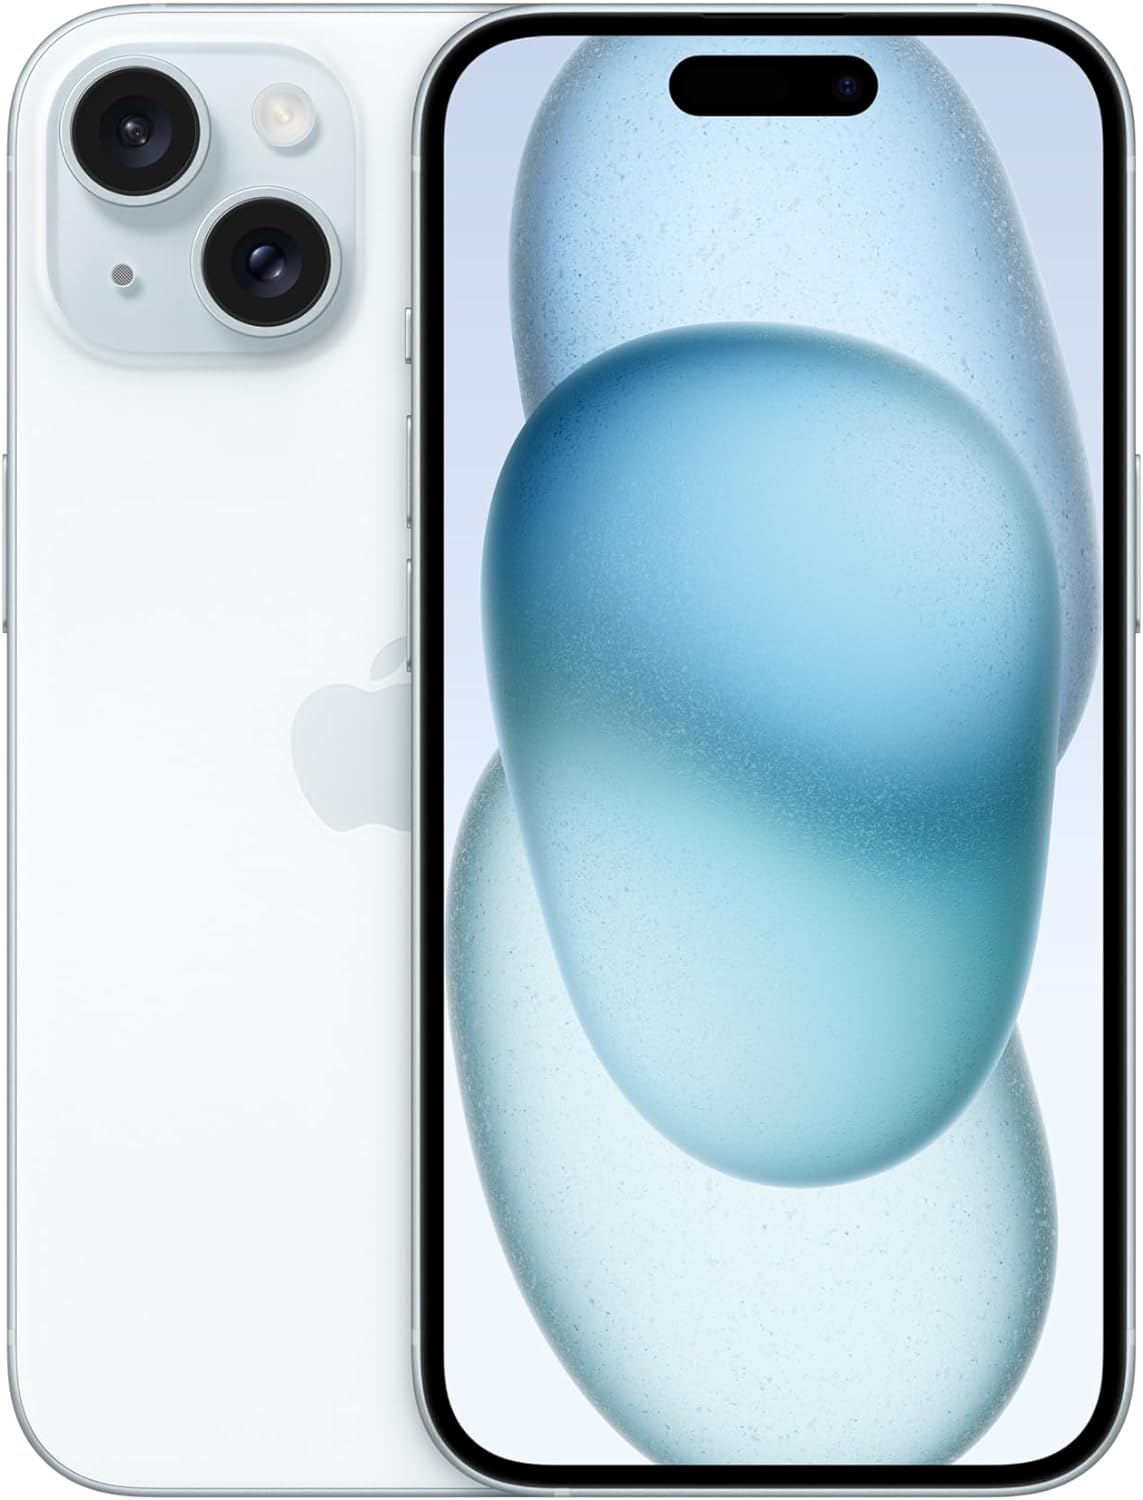 Apple iPhone 15 (256 GB) - Blue: Dynamic Island alerts and Live Activities keep you connected on the go. 0195949037344